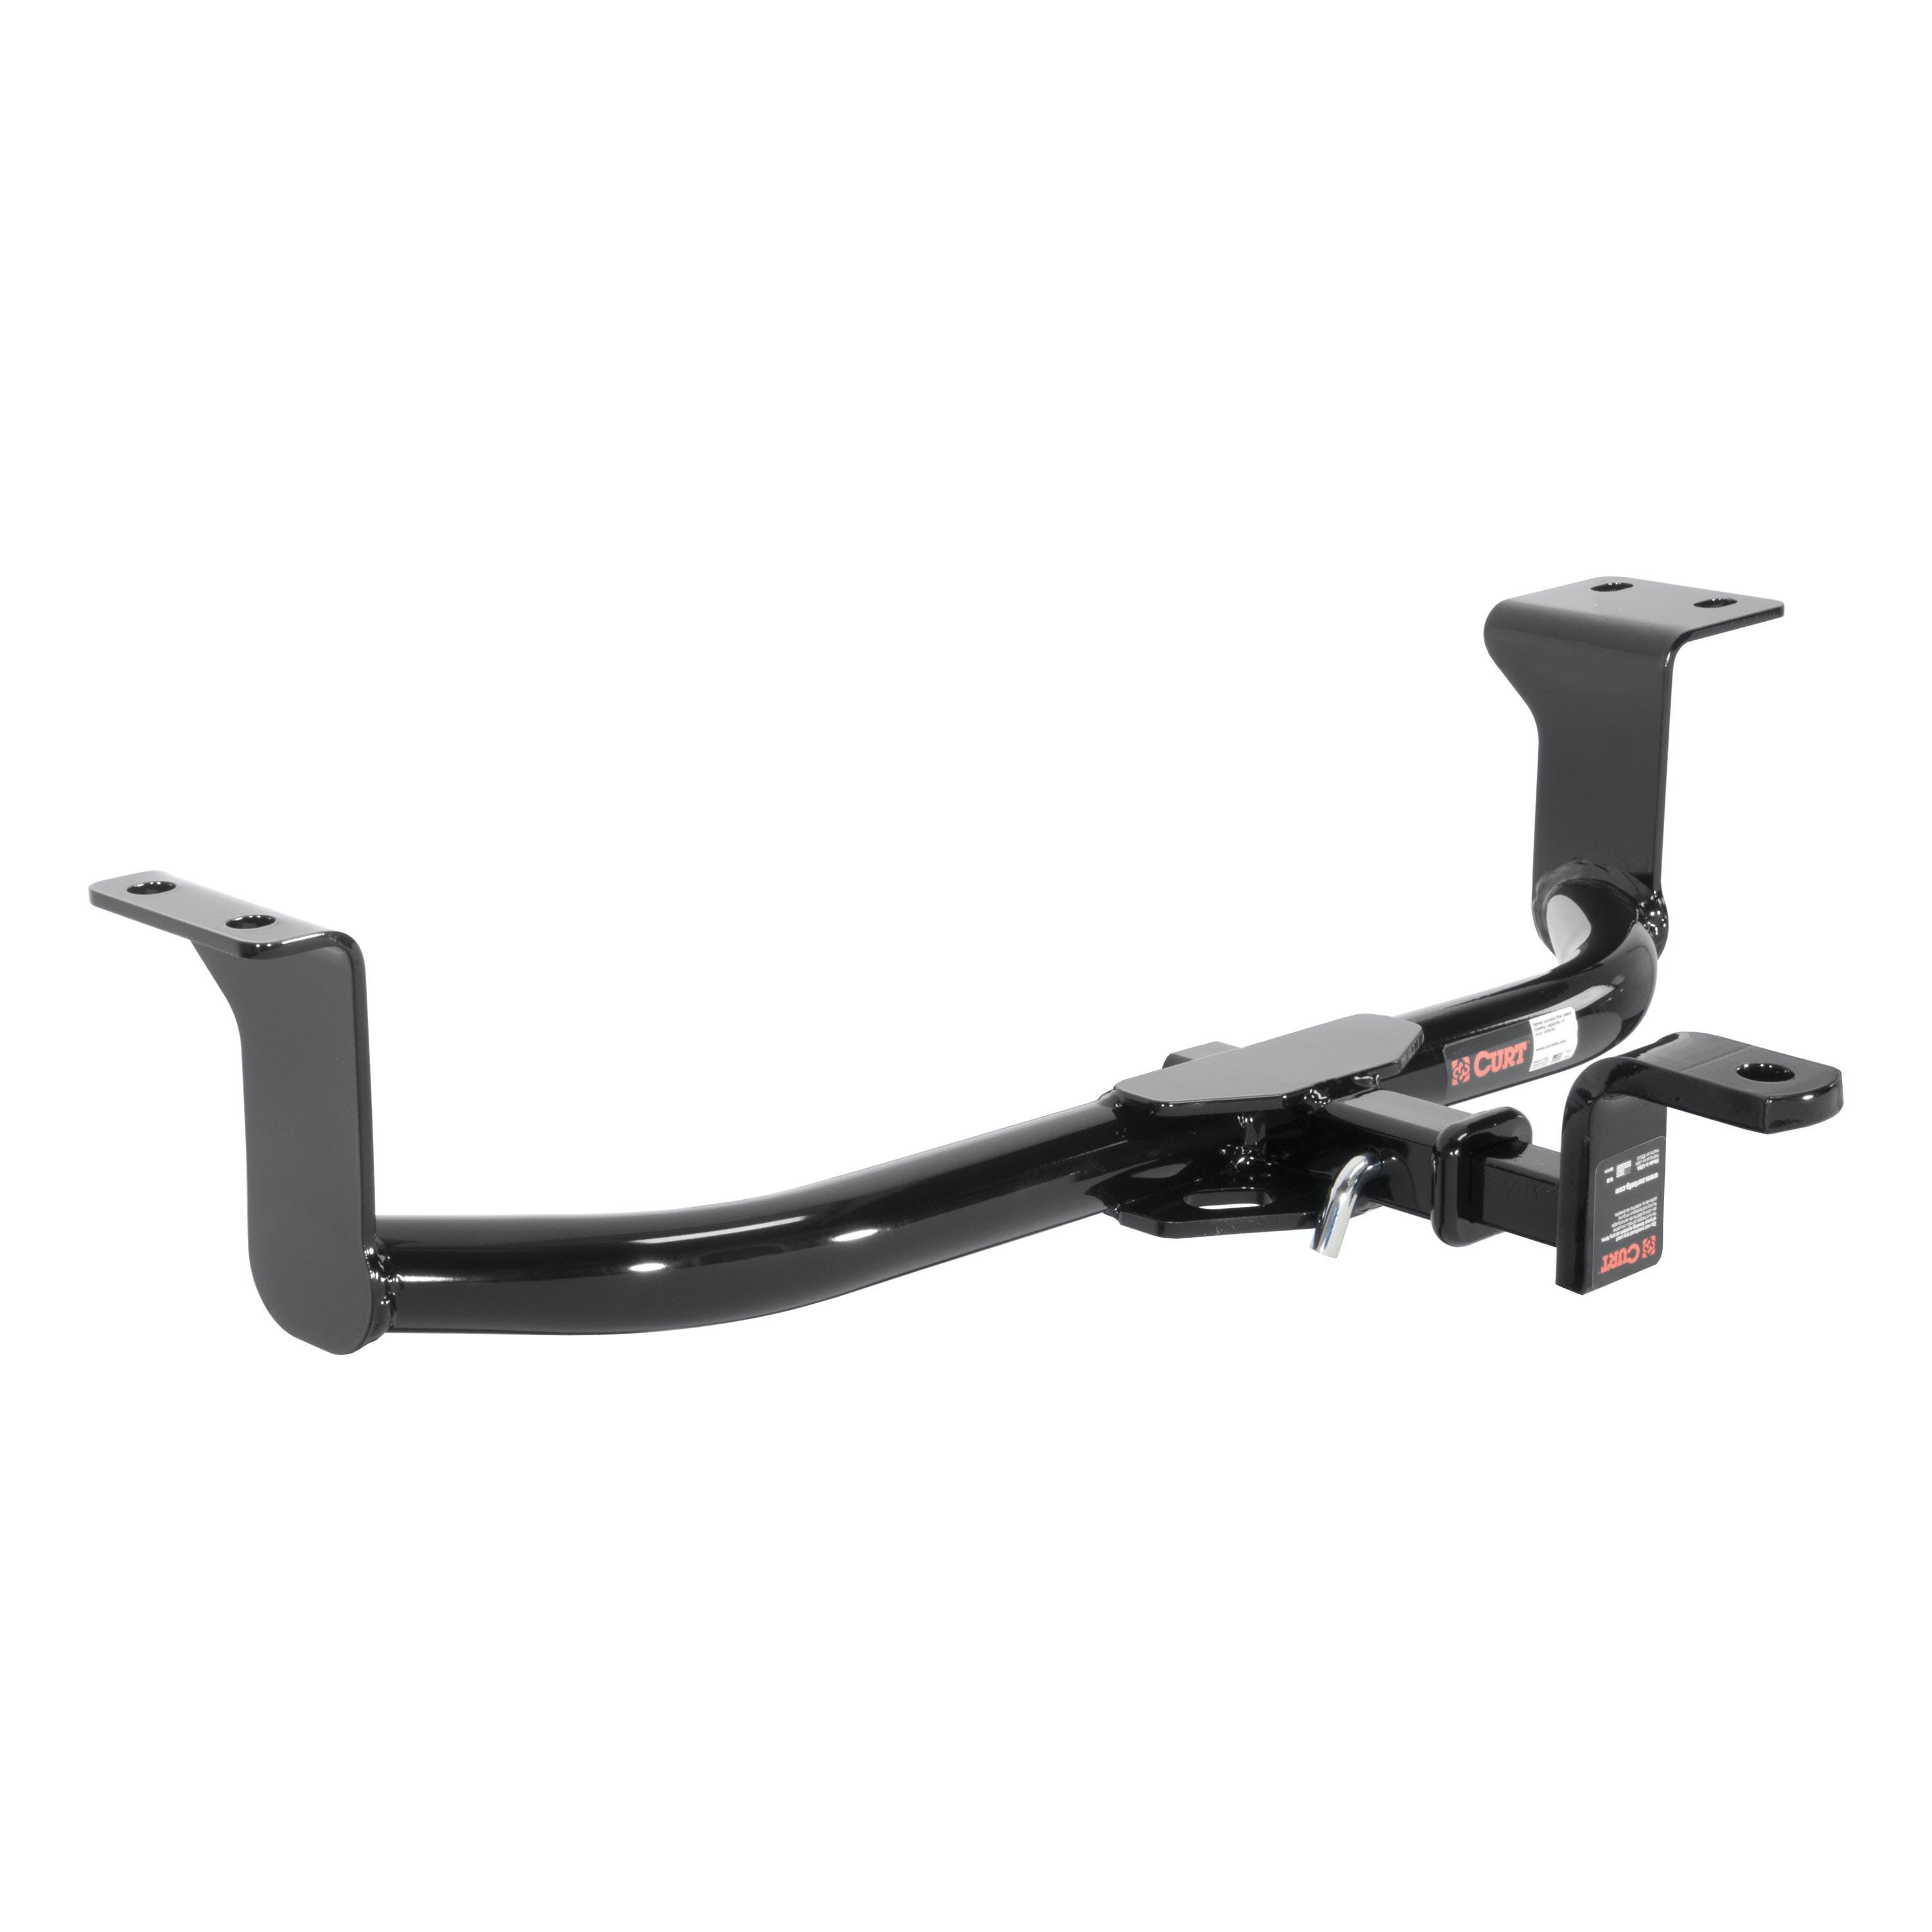 CURT 112763 Class 1 Trailer Hitch, 1-1/4 Ball Mount, Select Toyota Prius